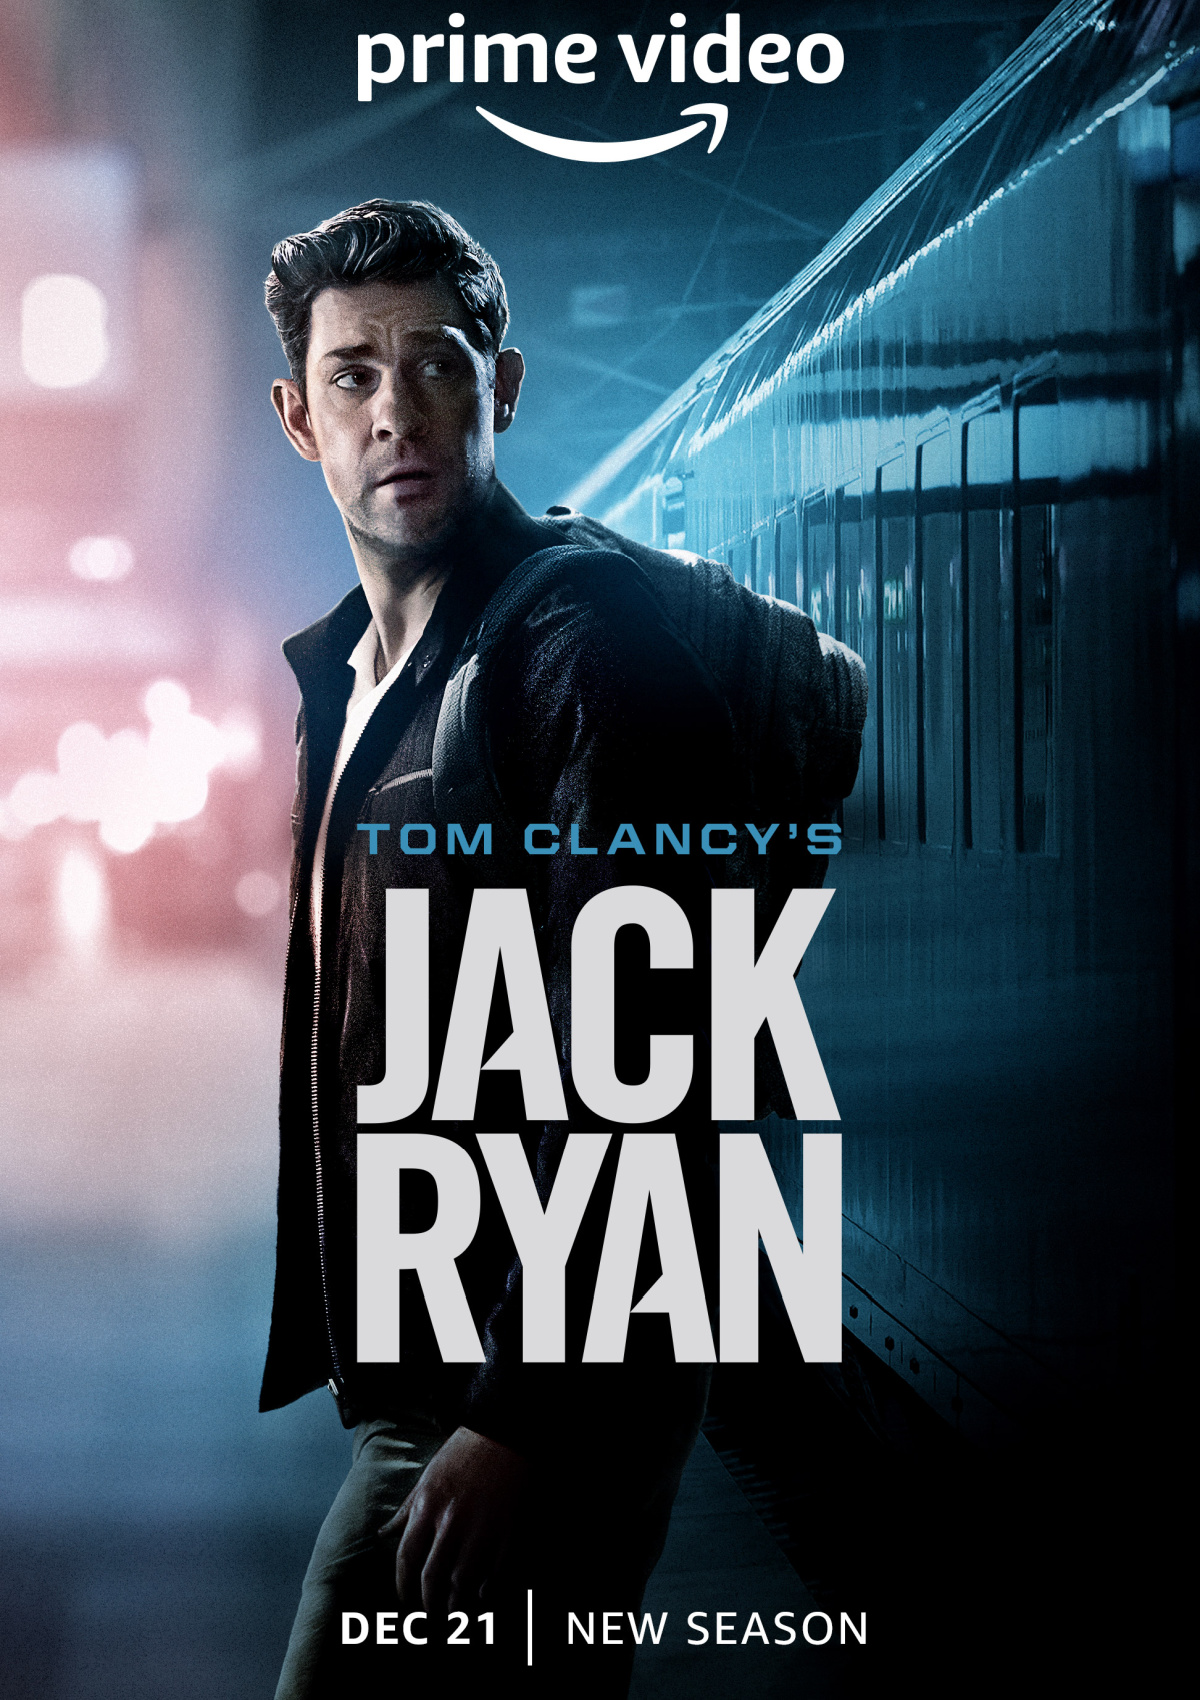 'Tom Clancy's Jack Ryan' will premiere on Prime Video on December 21 with eight episodes of Season 3.